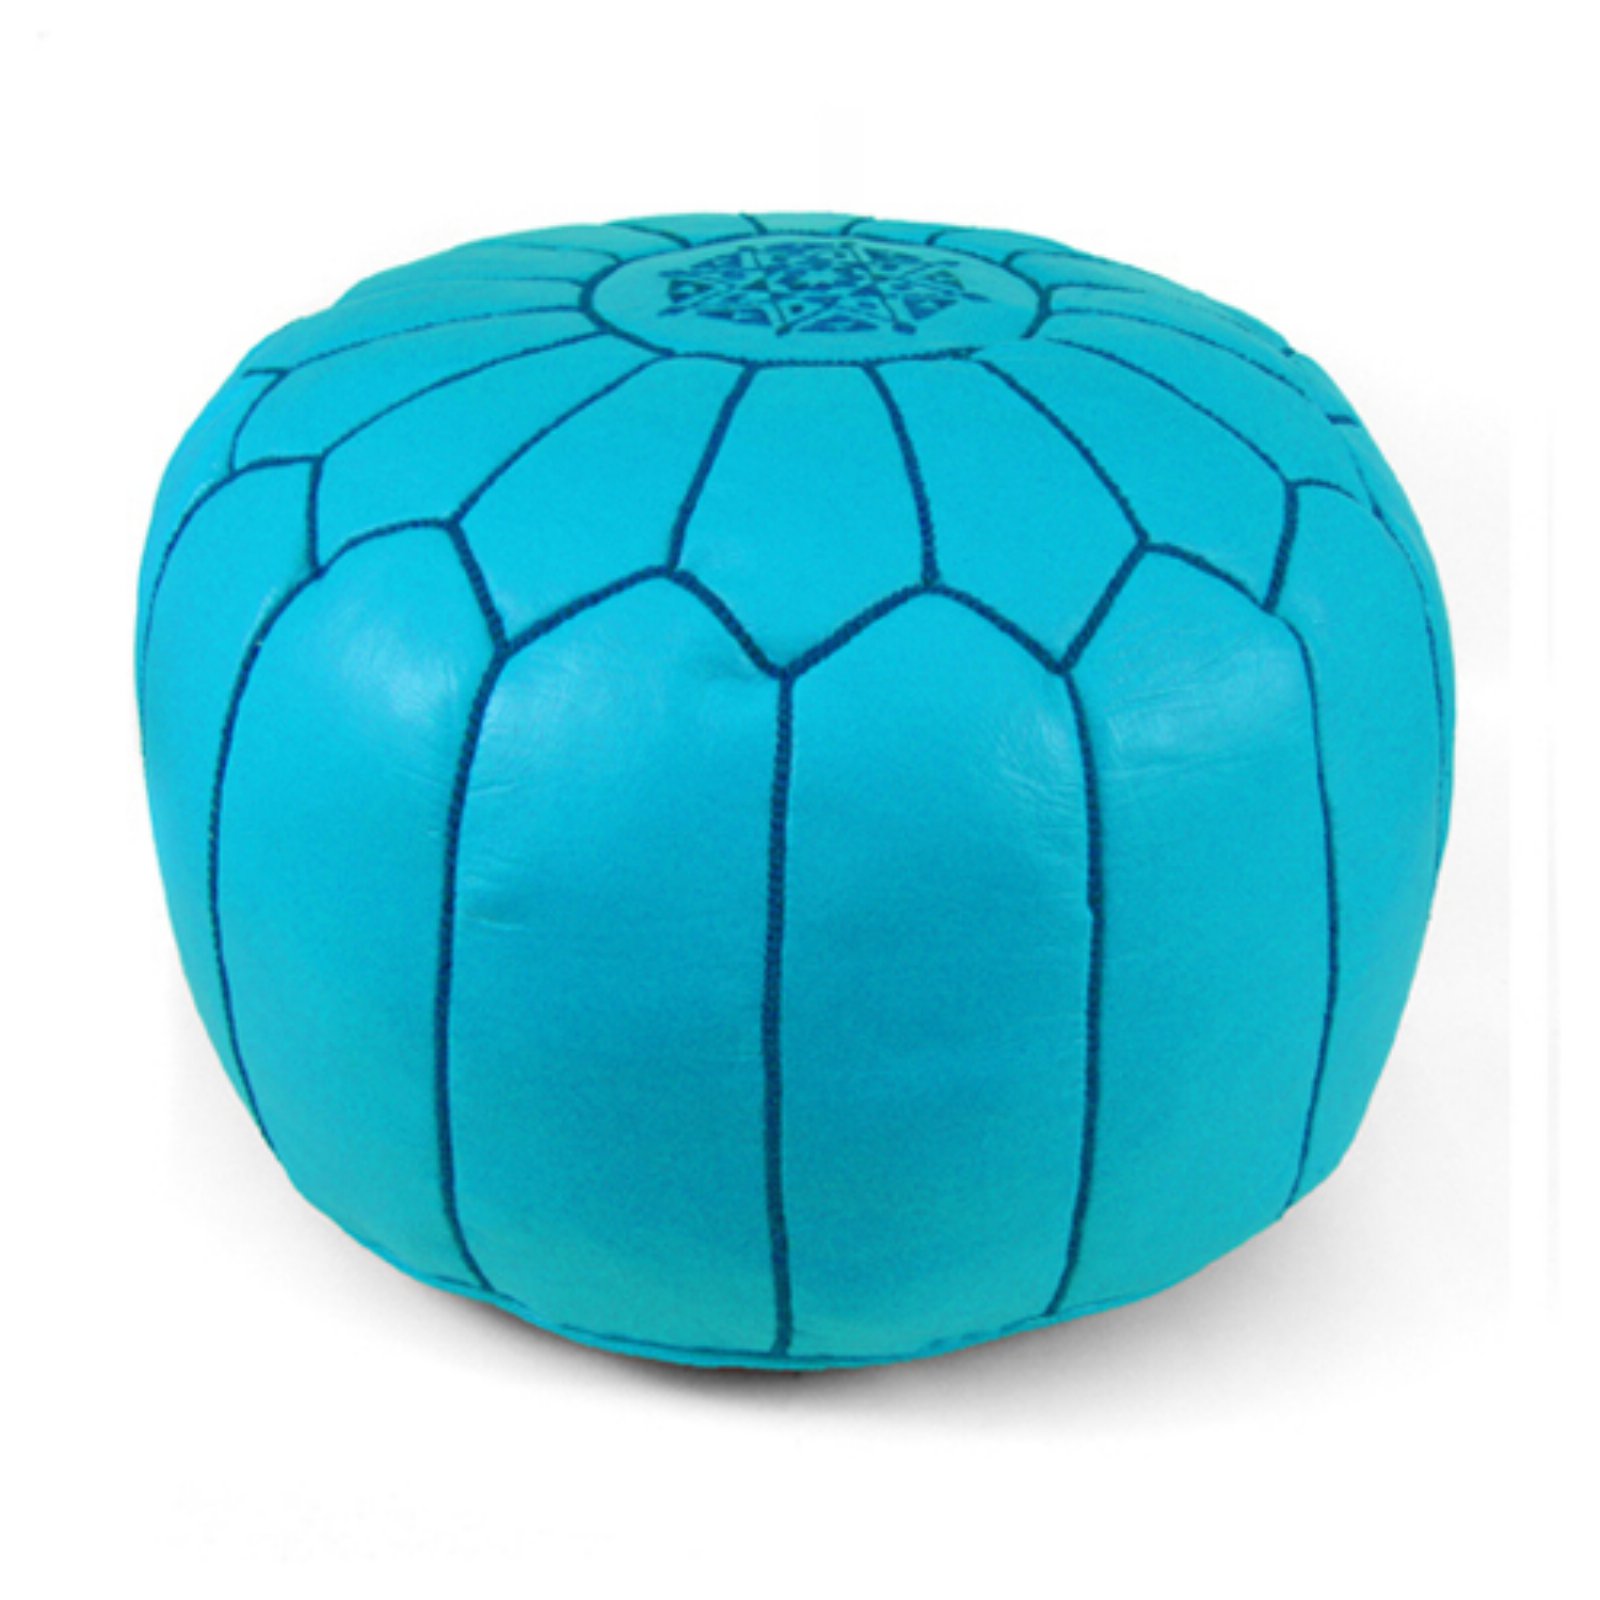 Ikram Design Round Moroccan Leather Pouf - image 4 of 4